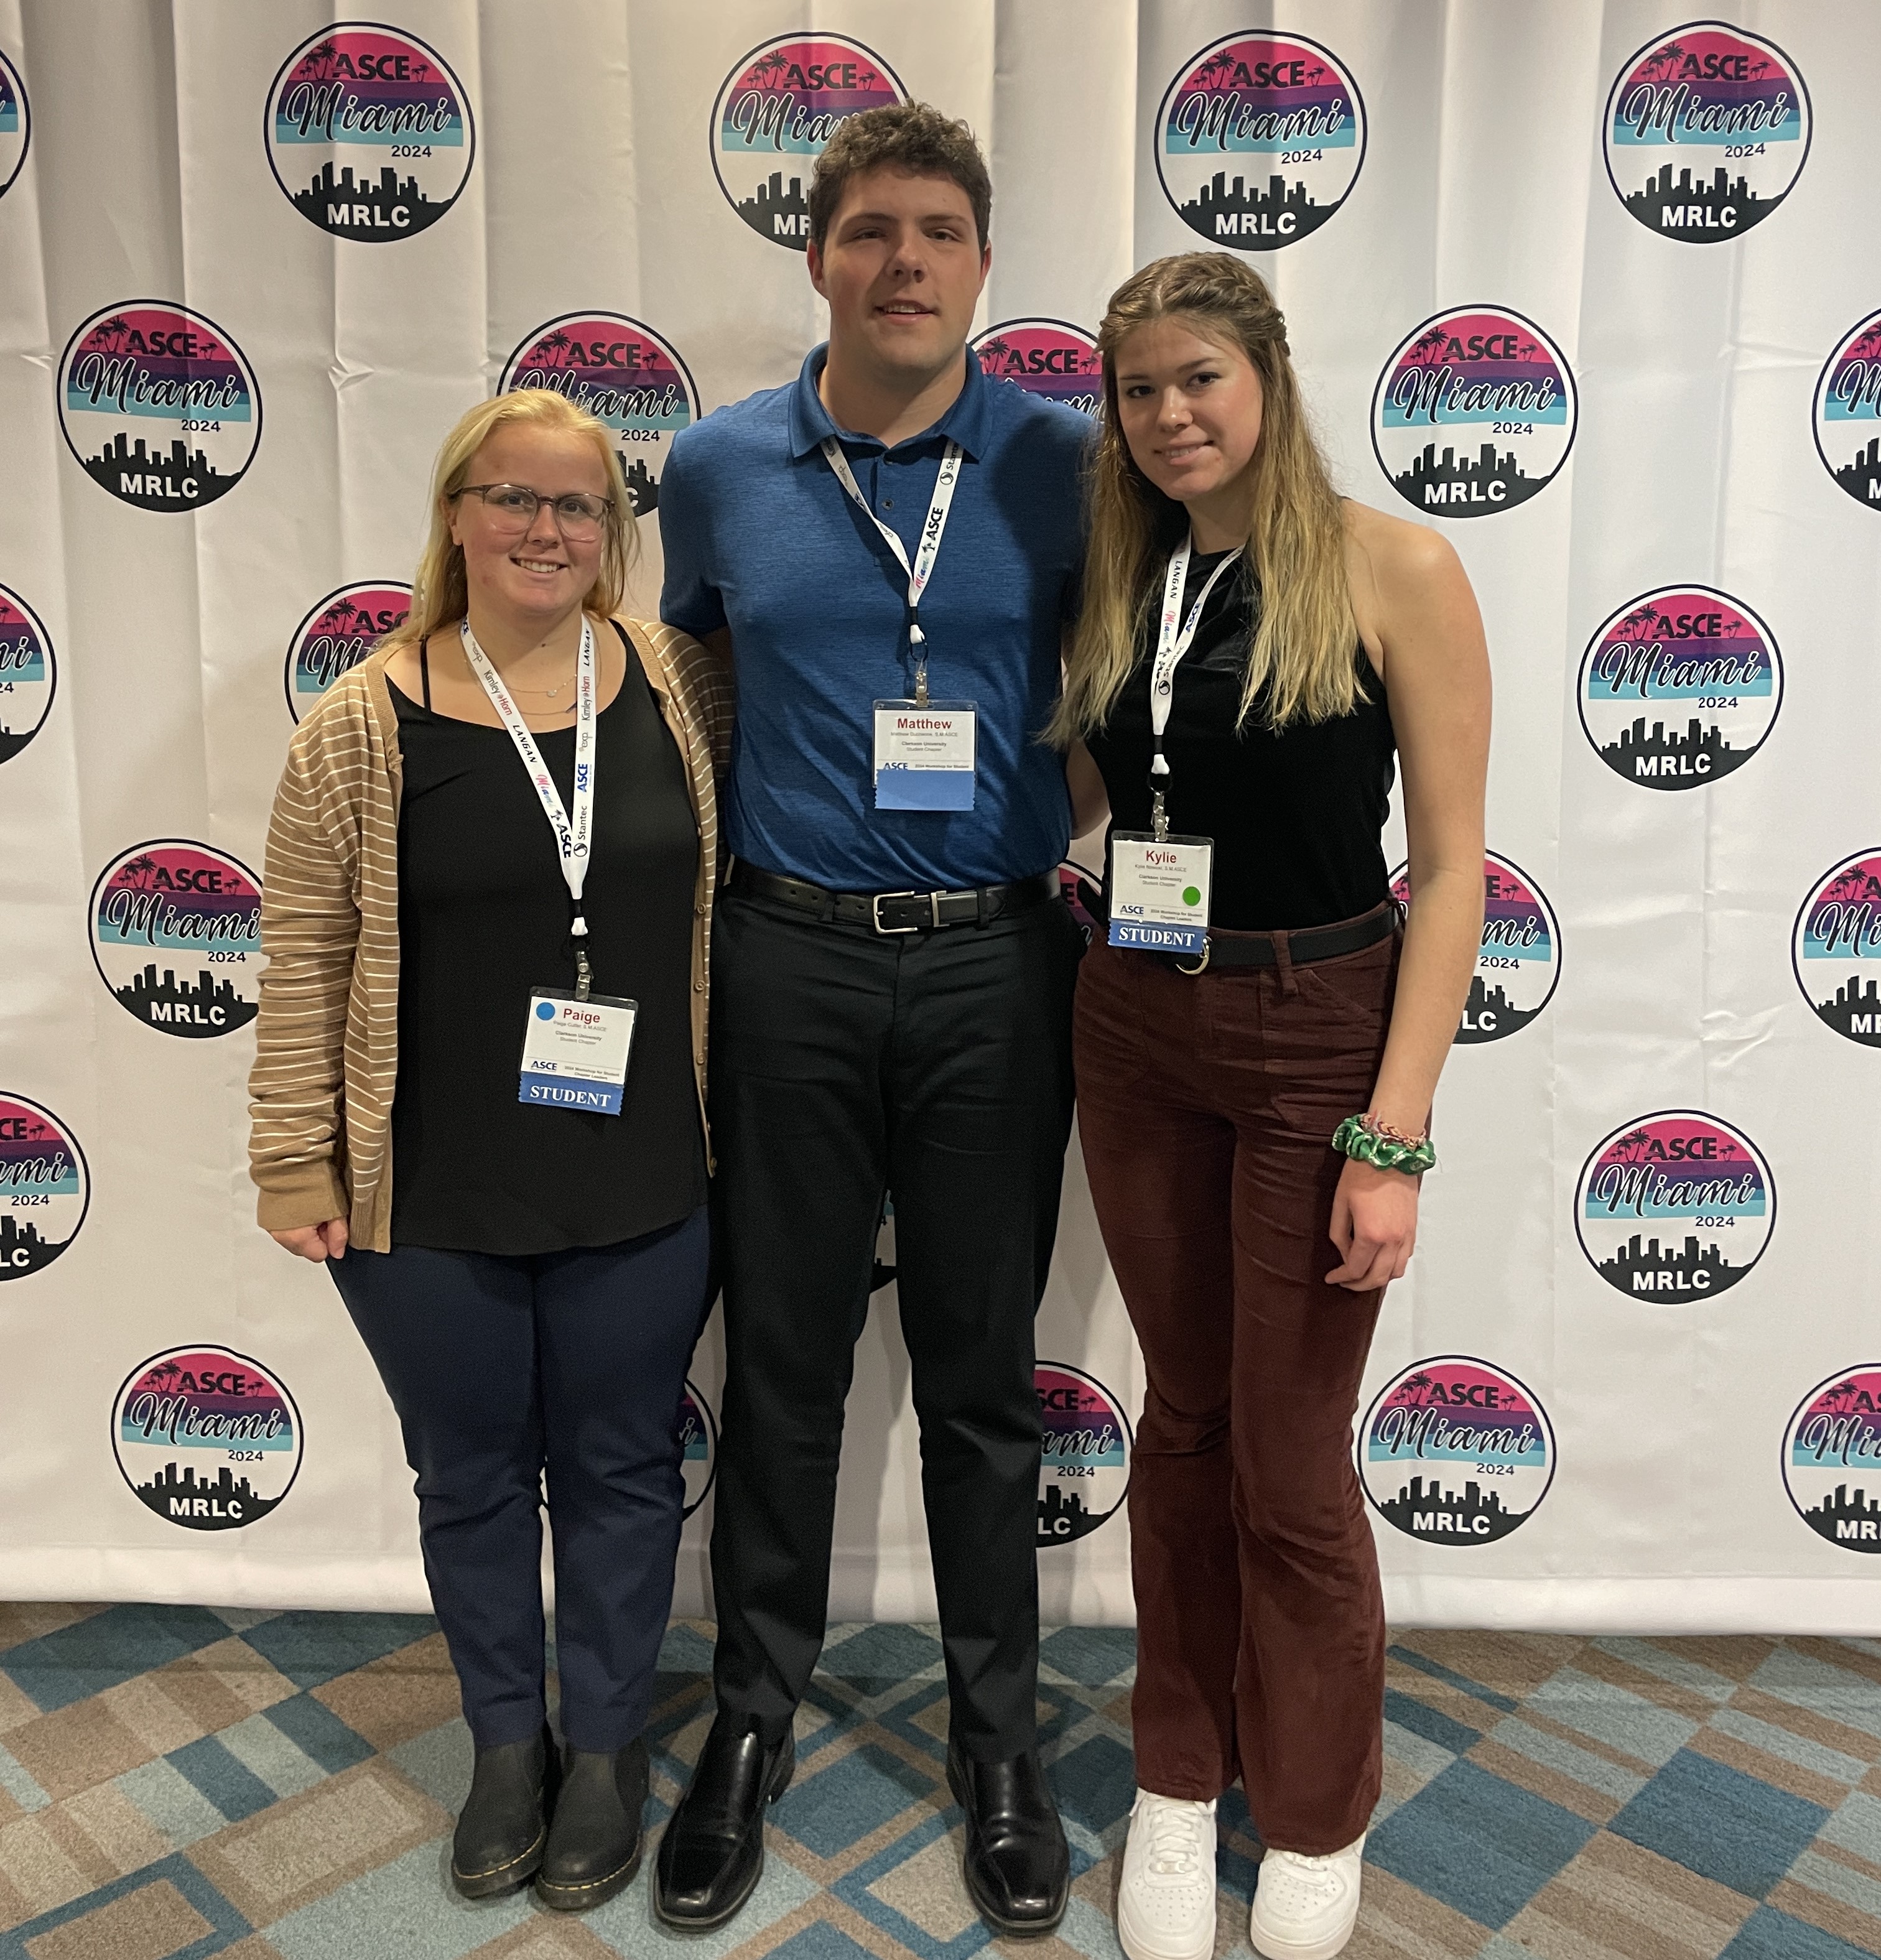 Matthew Ducharme ‘25, Kylie Nowicki ‘25, and Paige Cutler ‘25, pose for a photo together in front of a backdrop at the American Society of Civil Engineers Workshop for Student Leaders